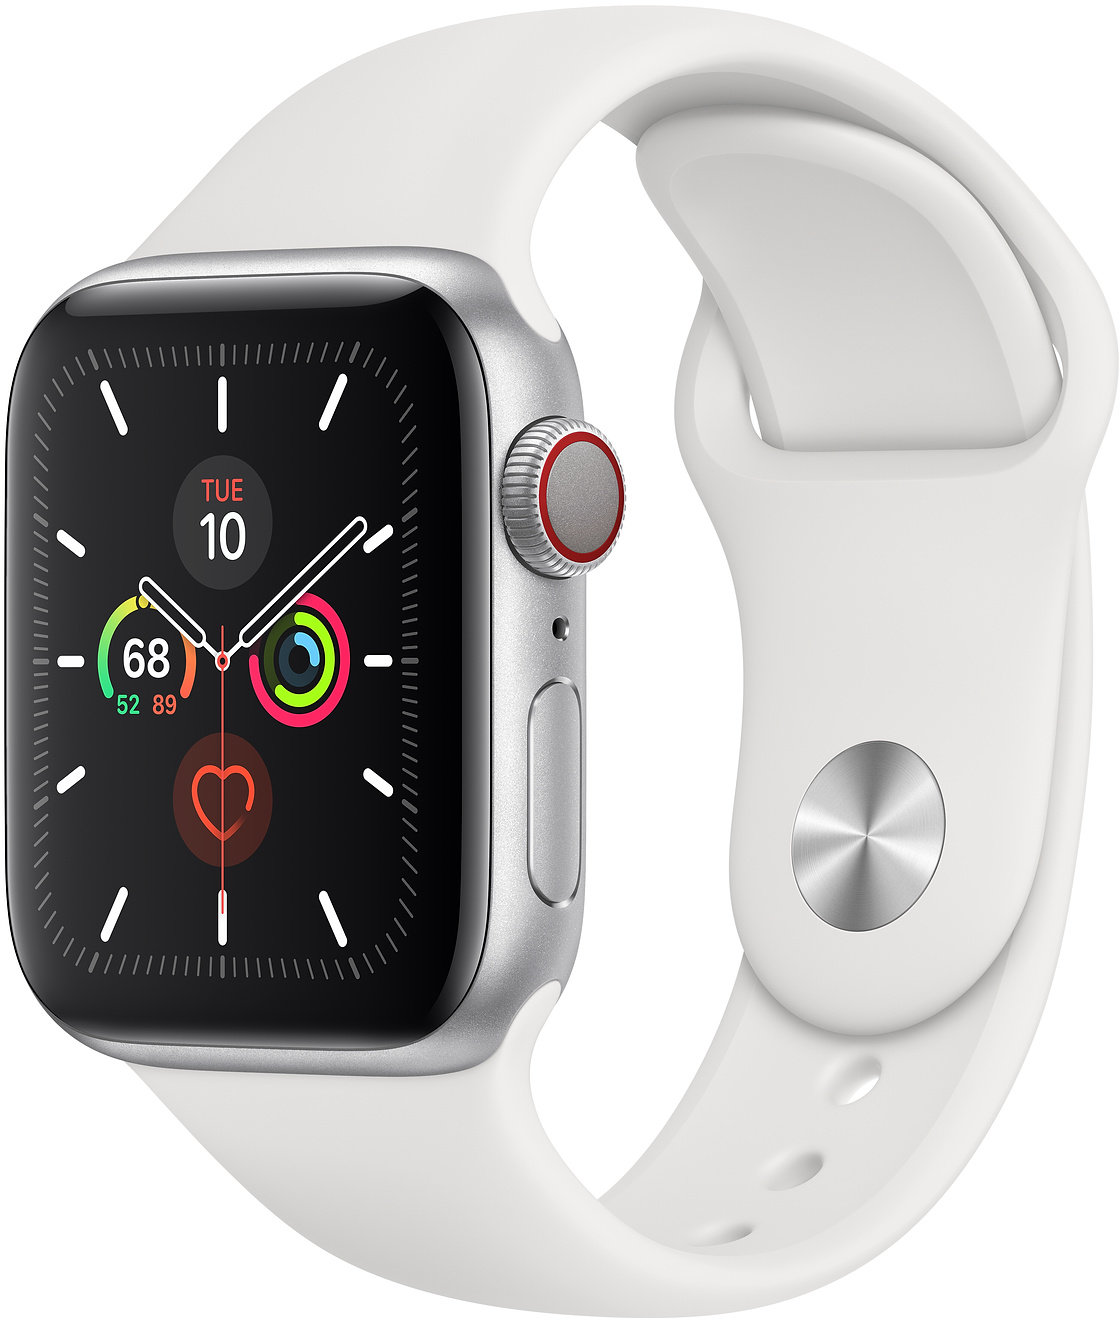 Акция на Apple Watch Series 5 40mm GPS+LTE Silver Aluminum Case with White Sport Band (MWWN2) от Y.UA